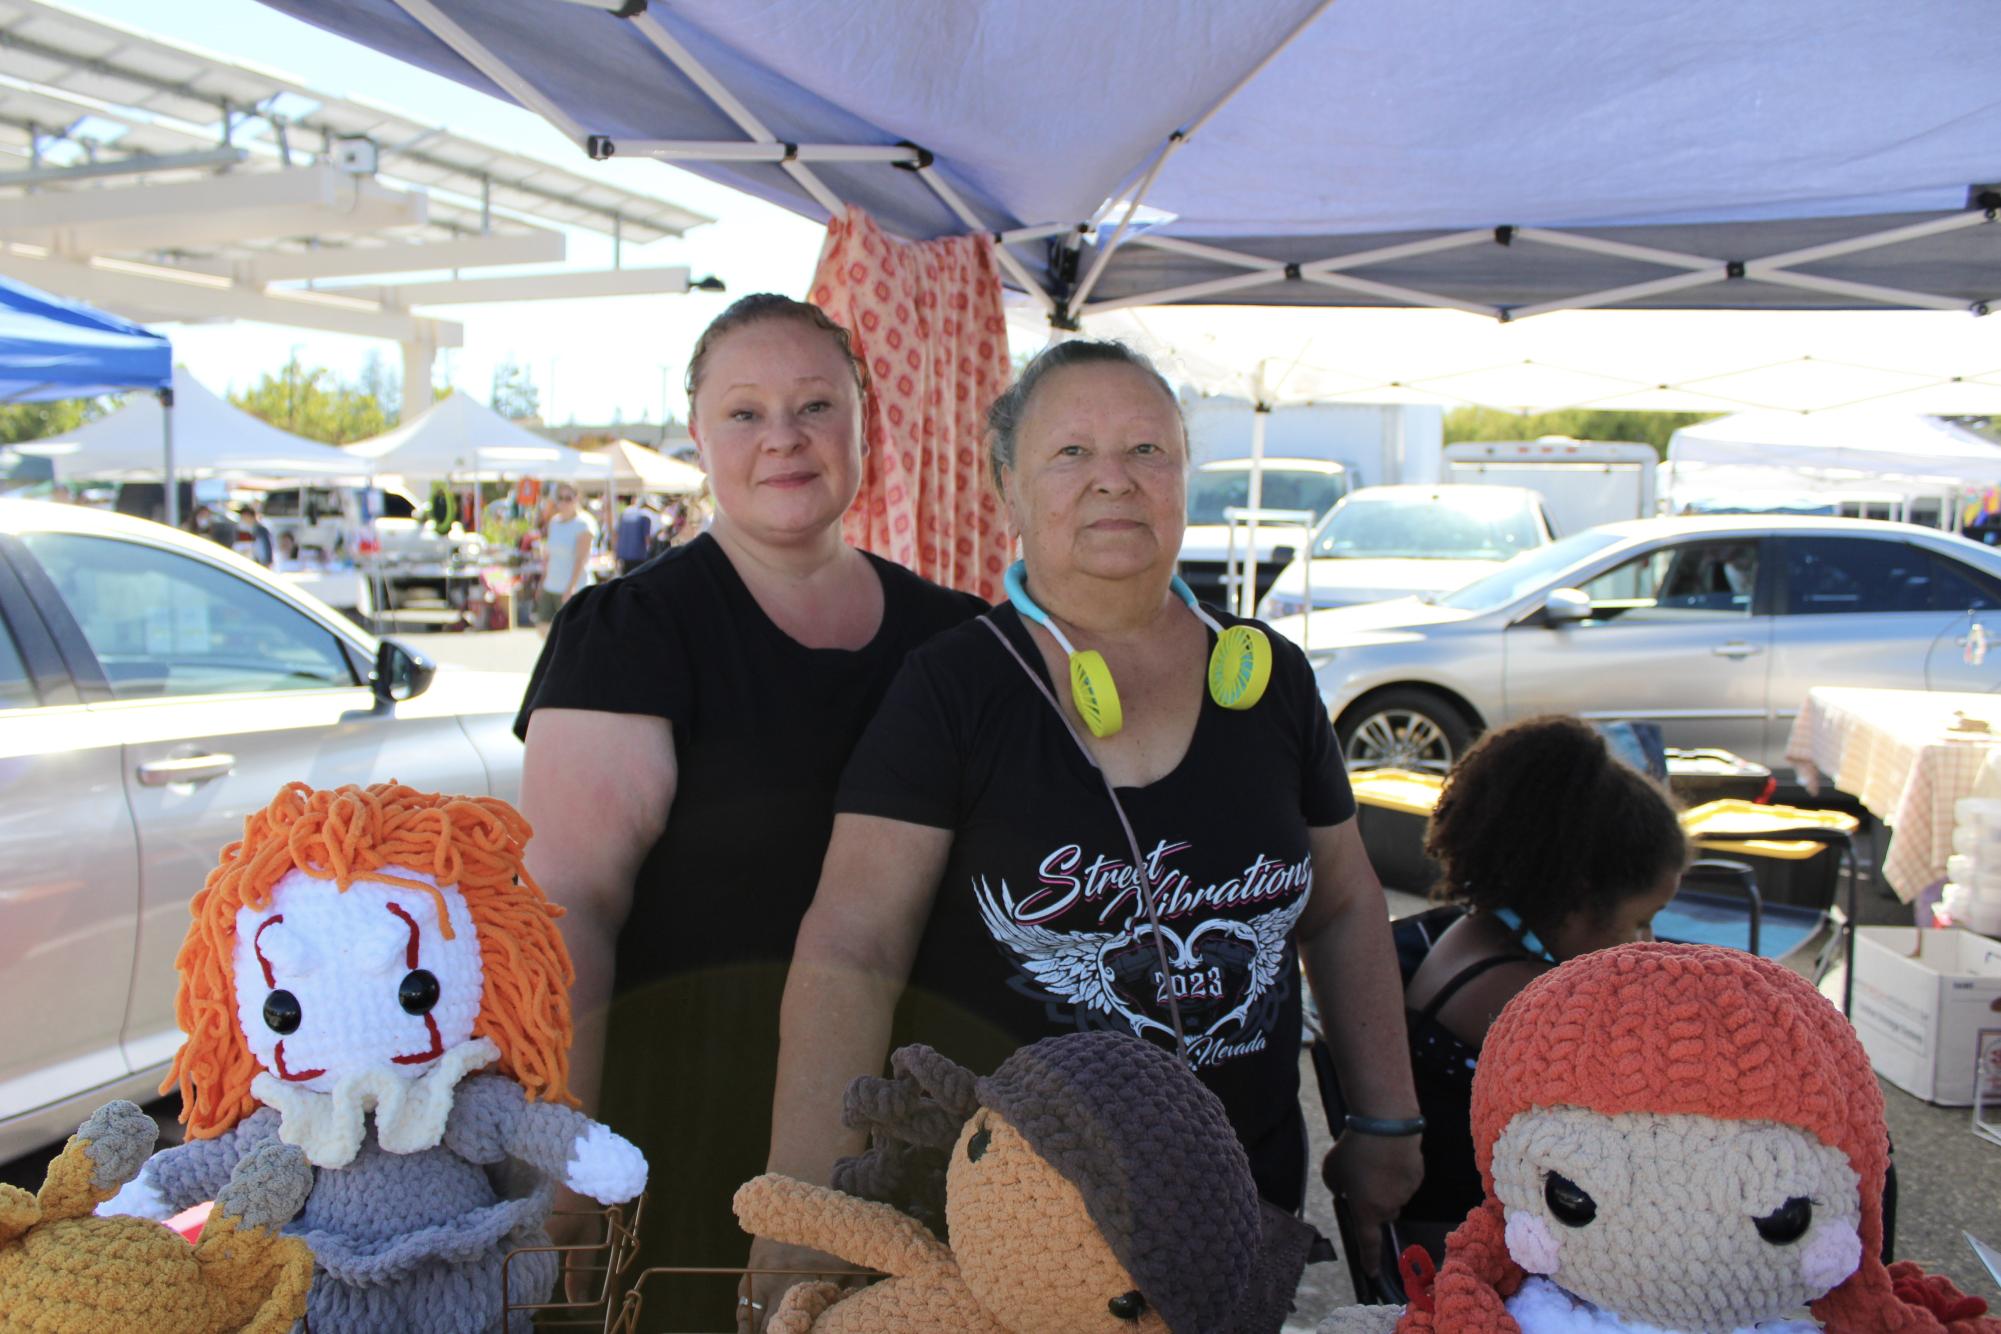 Malinda crochets plushies for Rosies Odds and Inns, with the elephant, crocodiles and bat being amongst her offered items. 